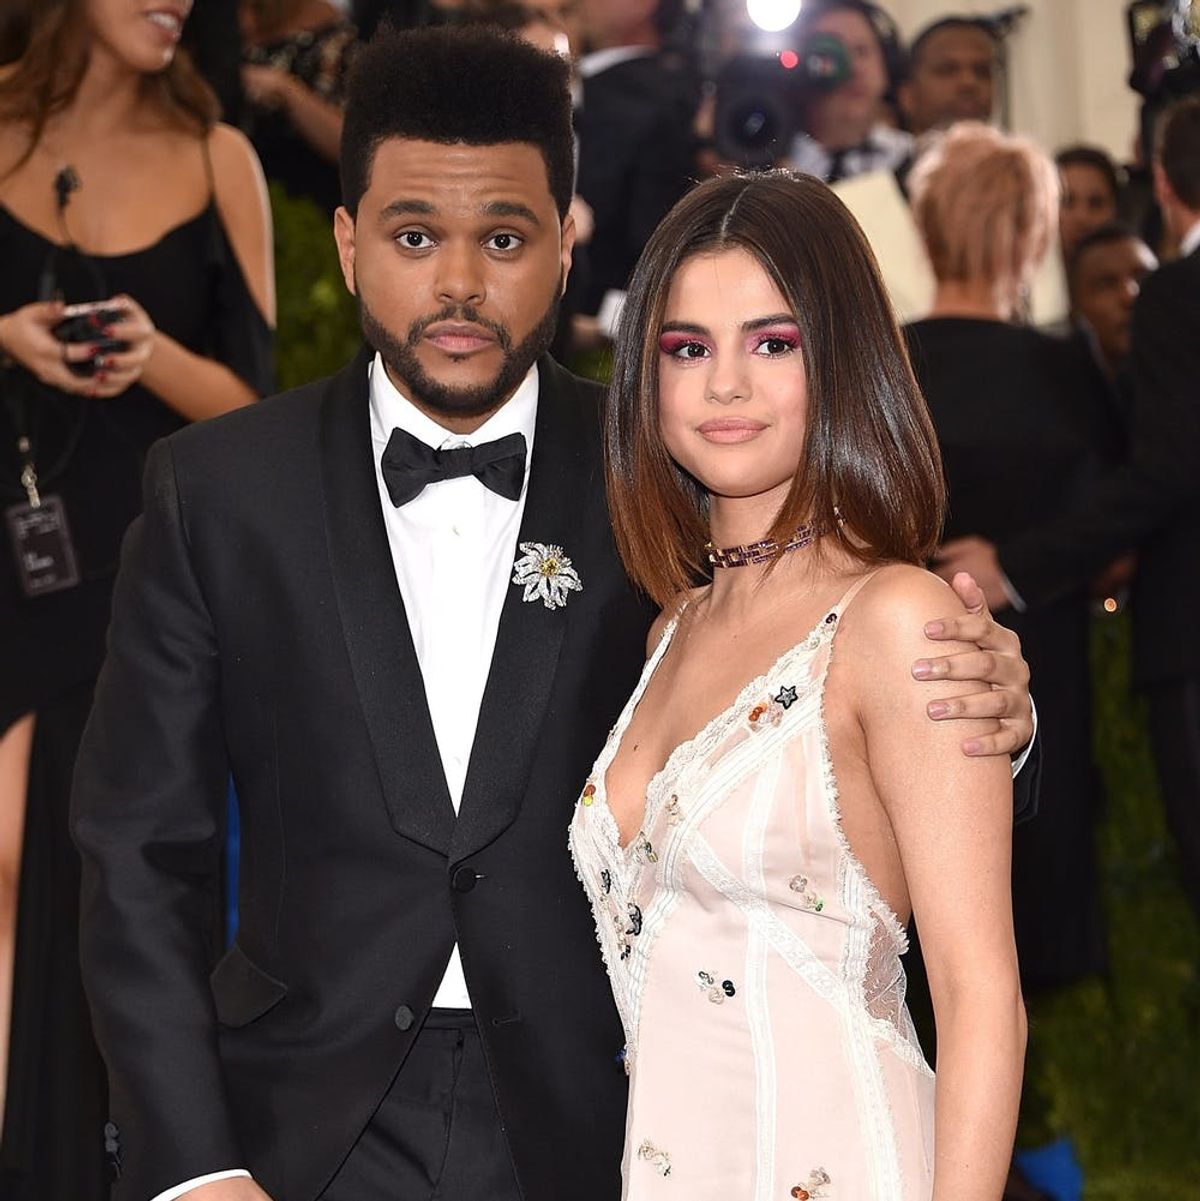 Here’s What Selena Gomez and the Weeknd Are Up to Since Their Reported Breakup